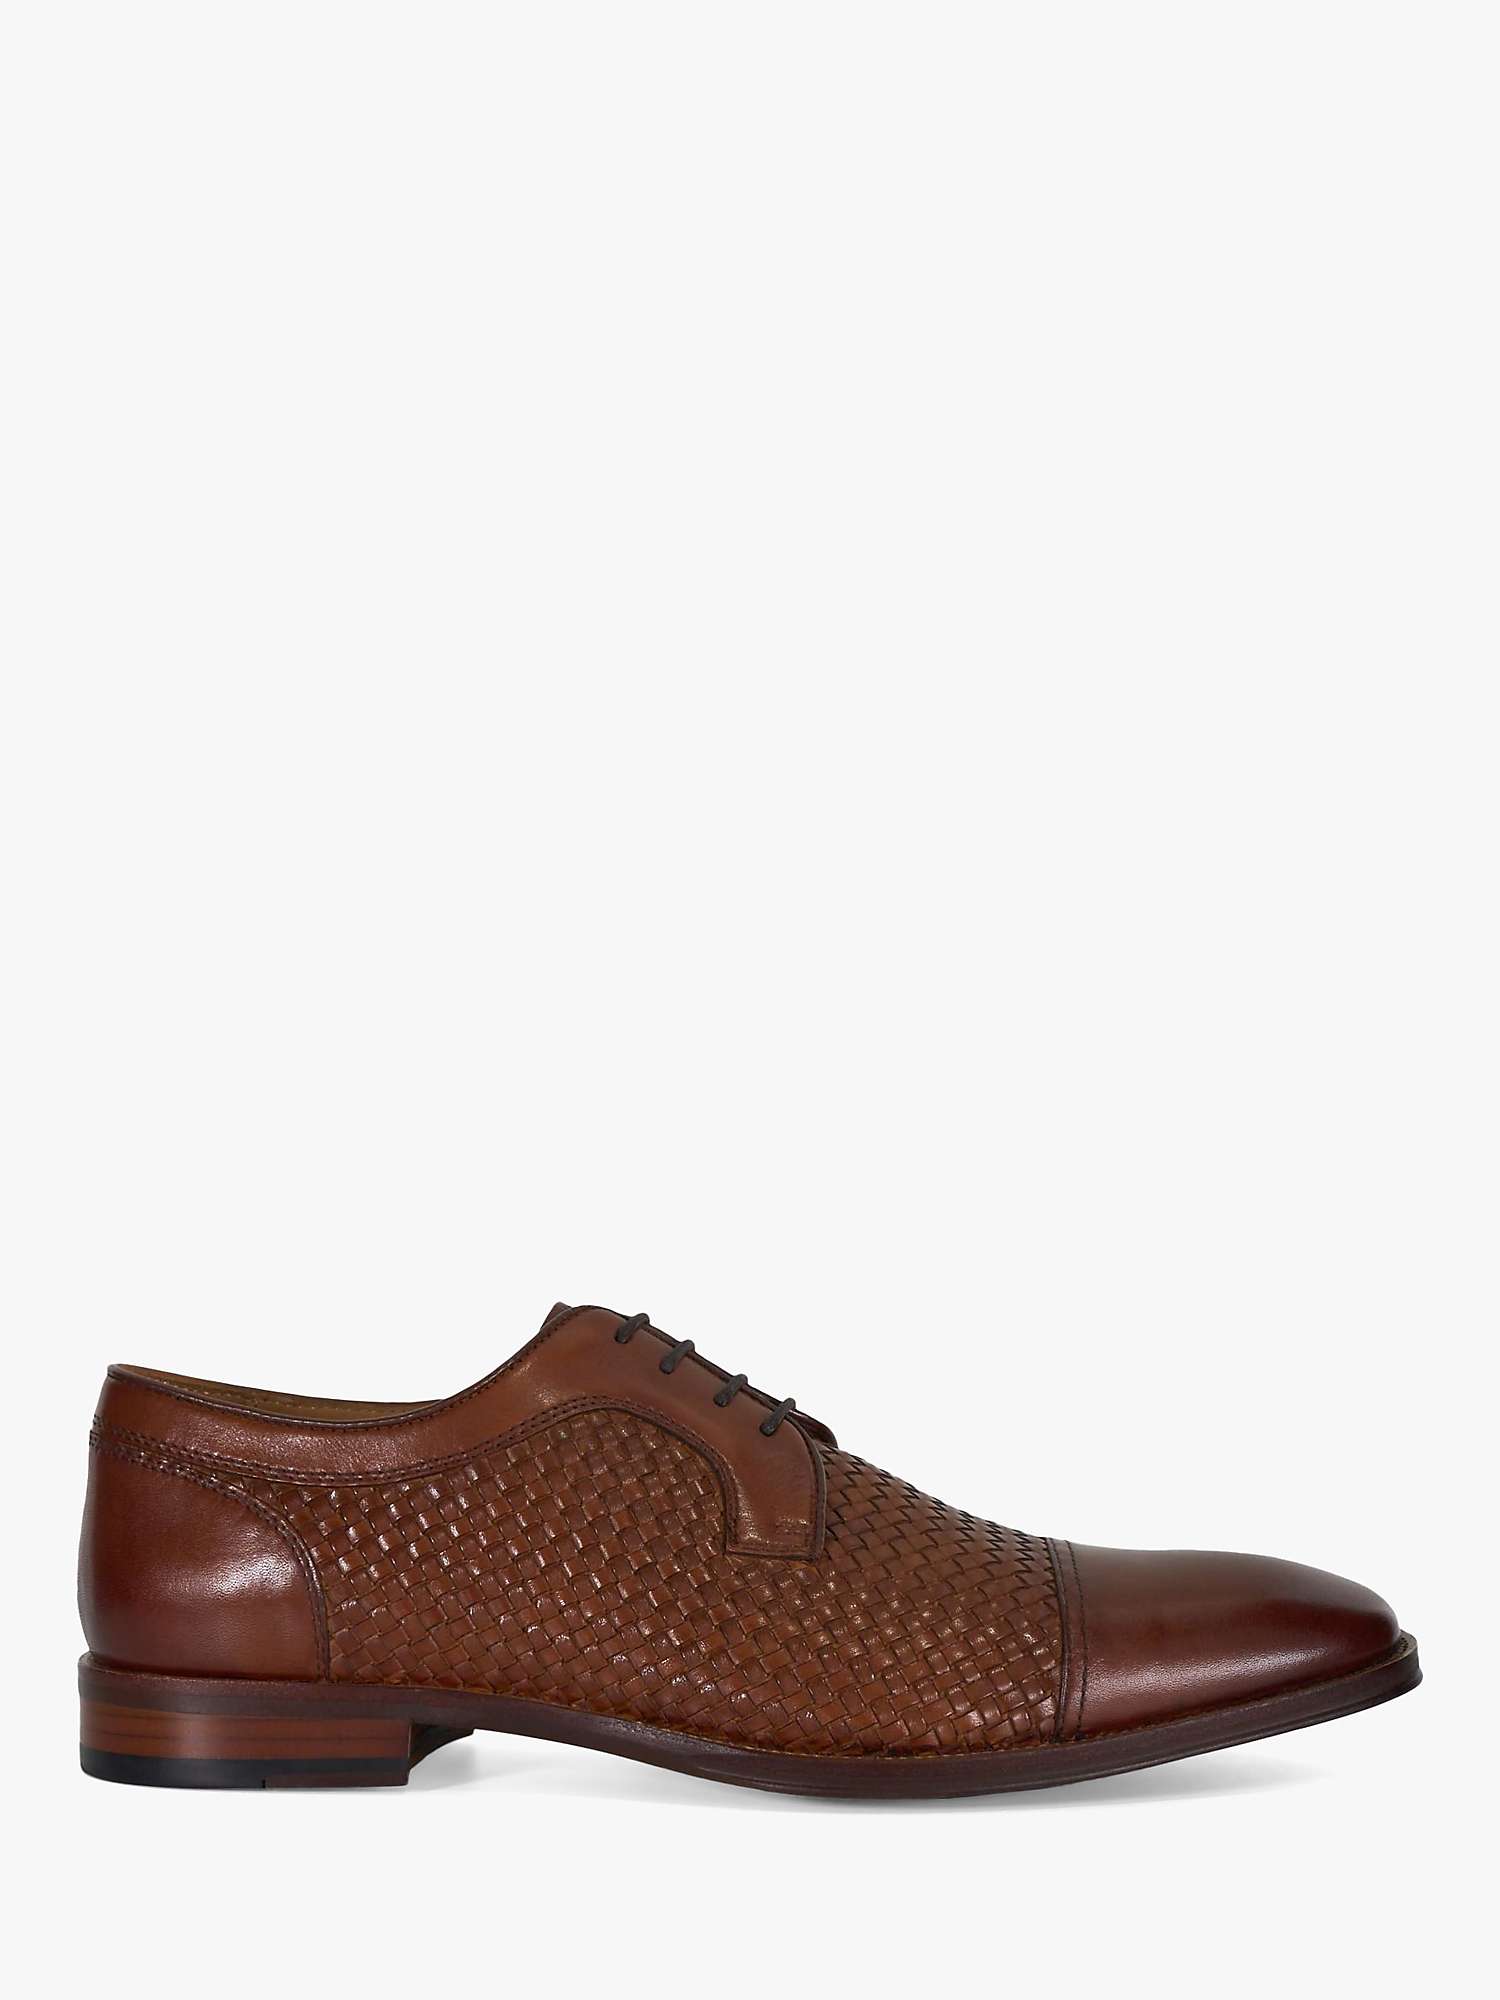 Buy Dune Stimuli Leather Woven Toecap Oxford Shoes Online at johnlewis.com